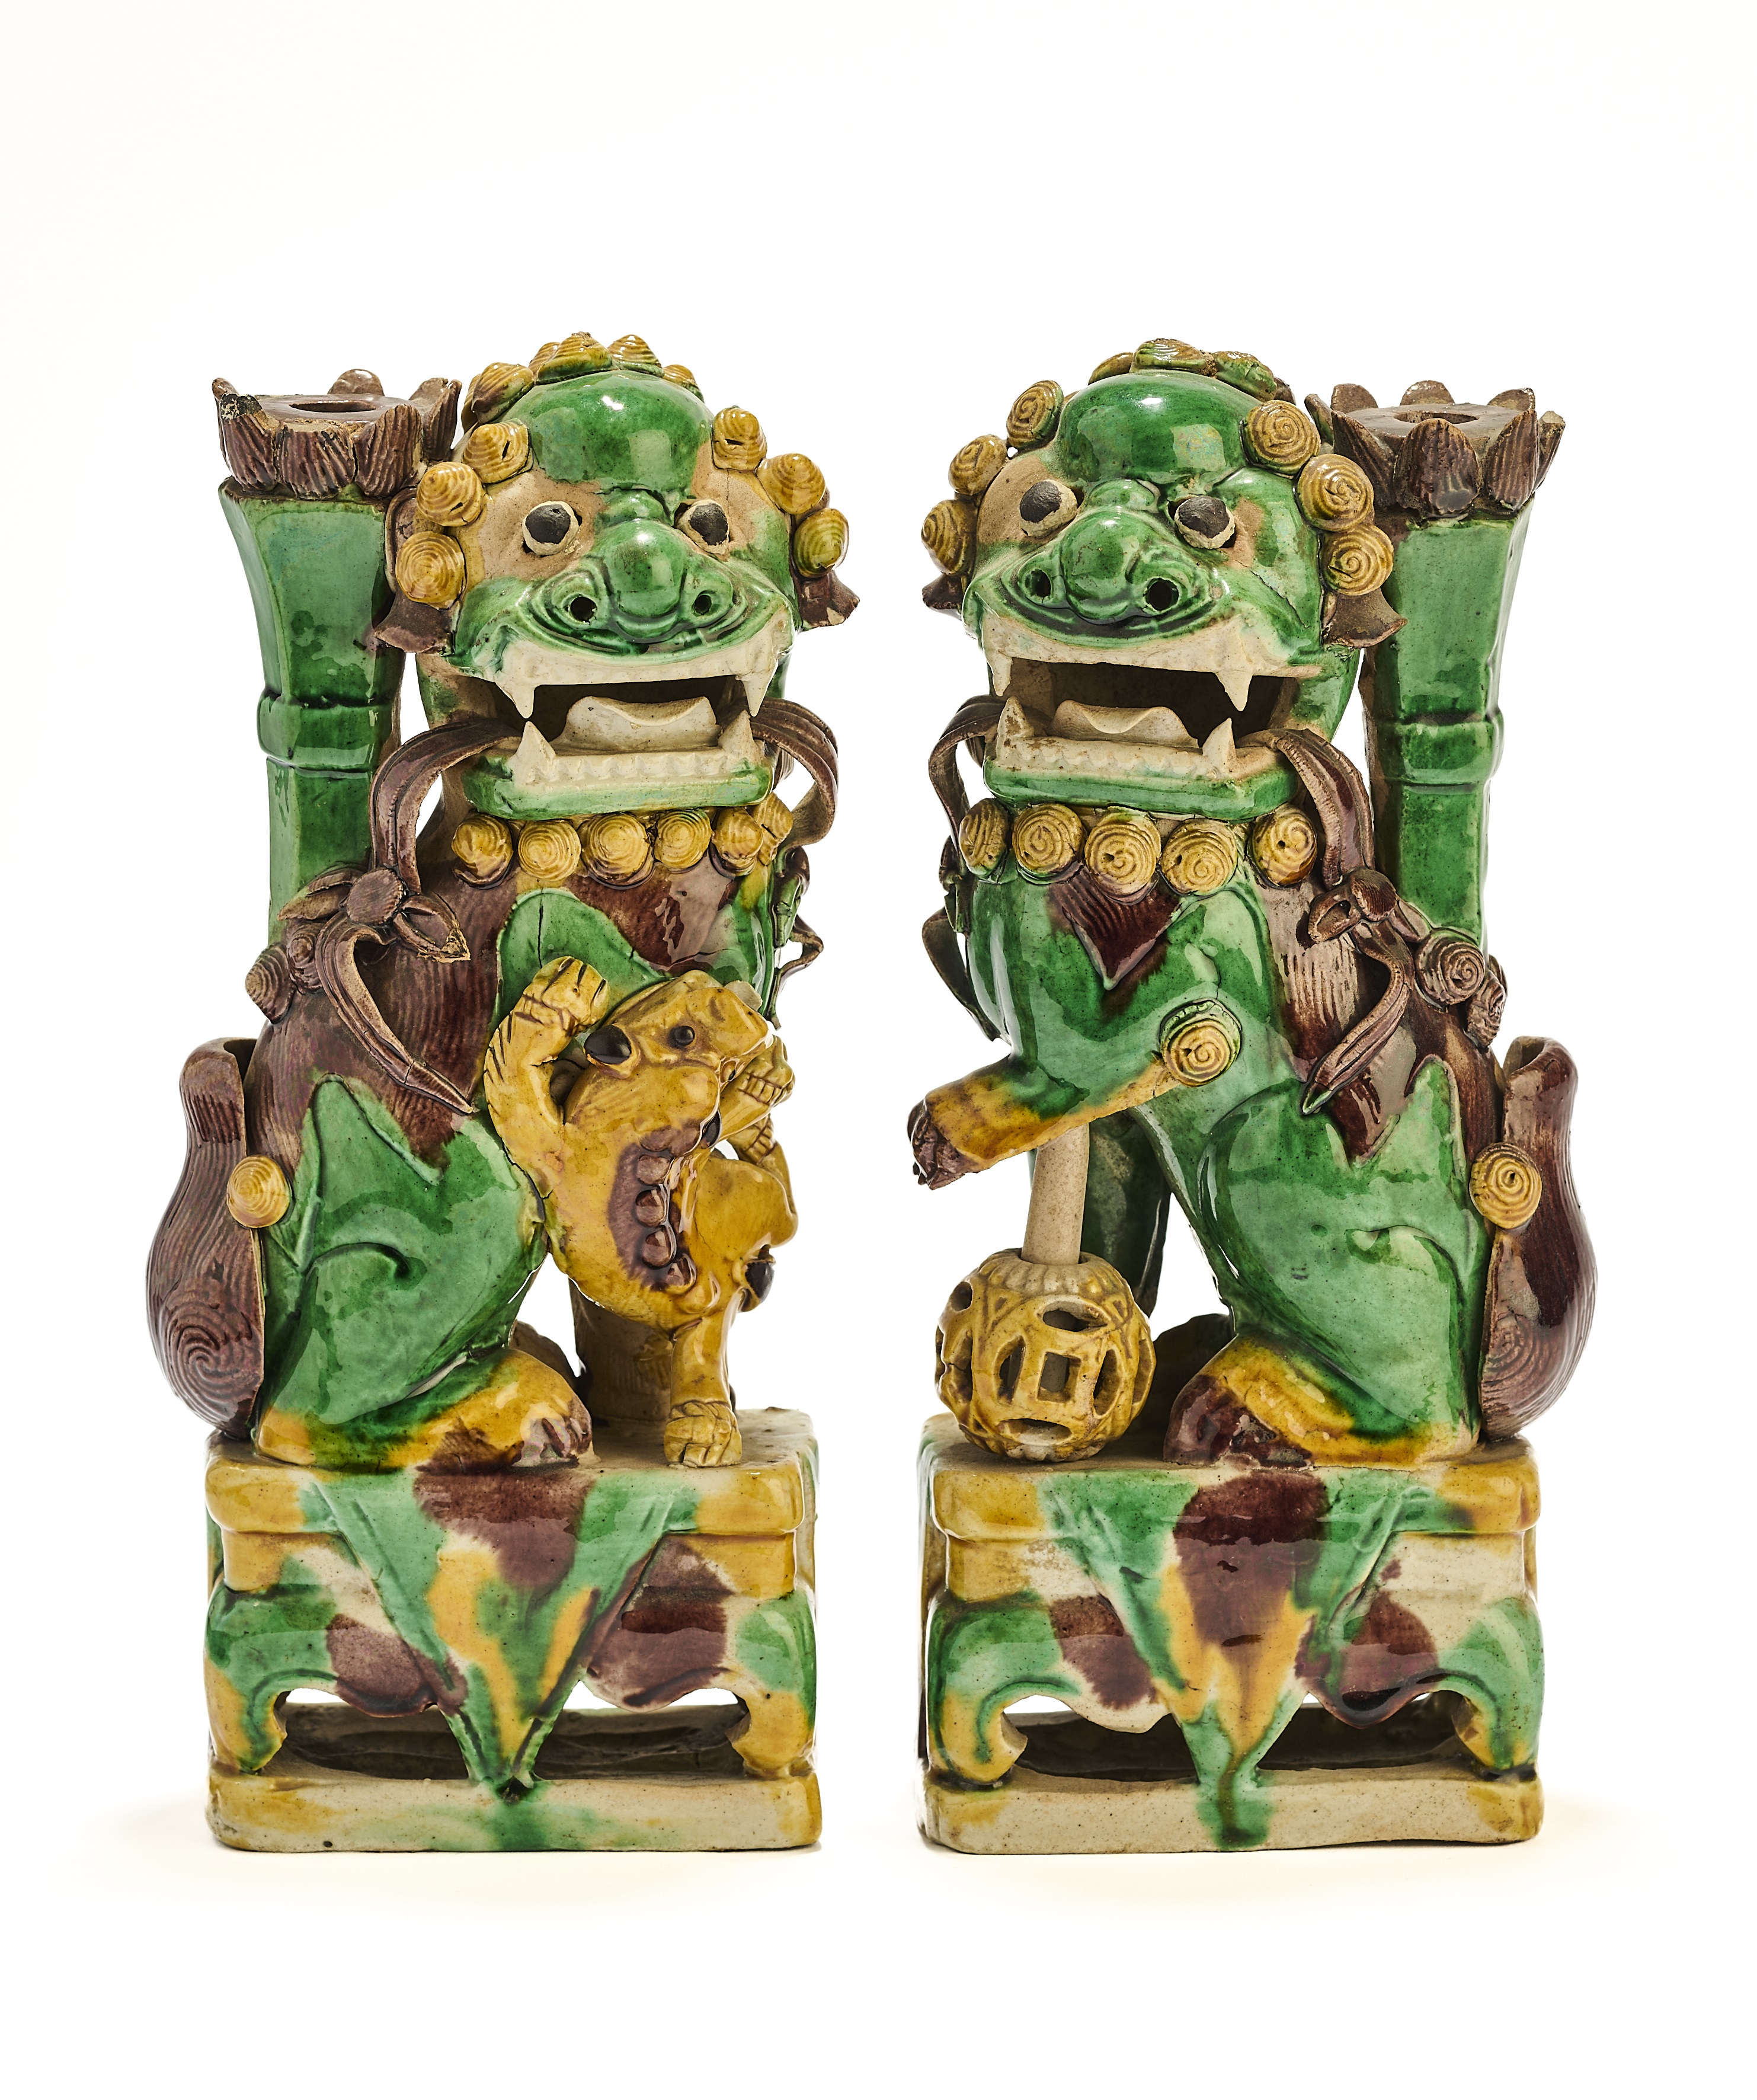 A PAIR OF CHINESE BISCUIT BUDDHIST LION INCENCE HOLDERS, QING DYNASTY, KANGXI PERIOD (1662-1722)